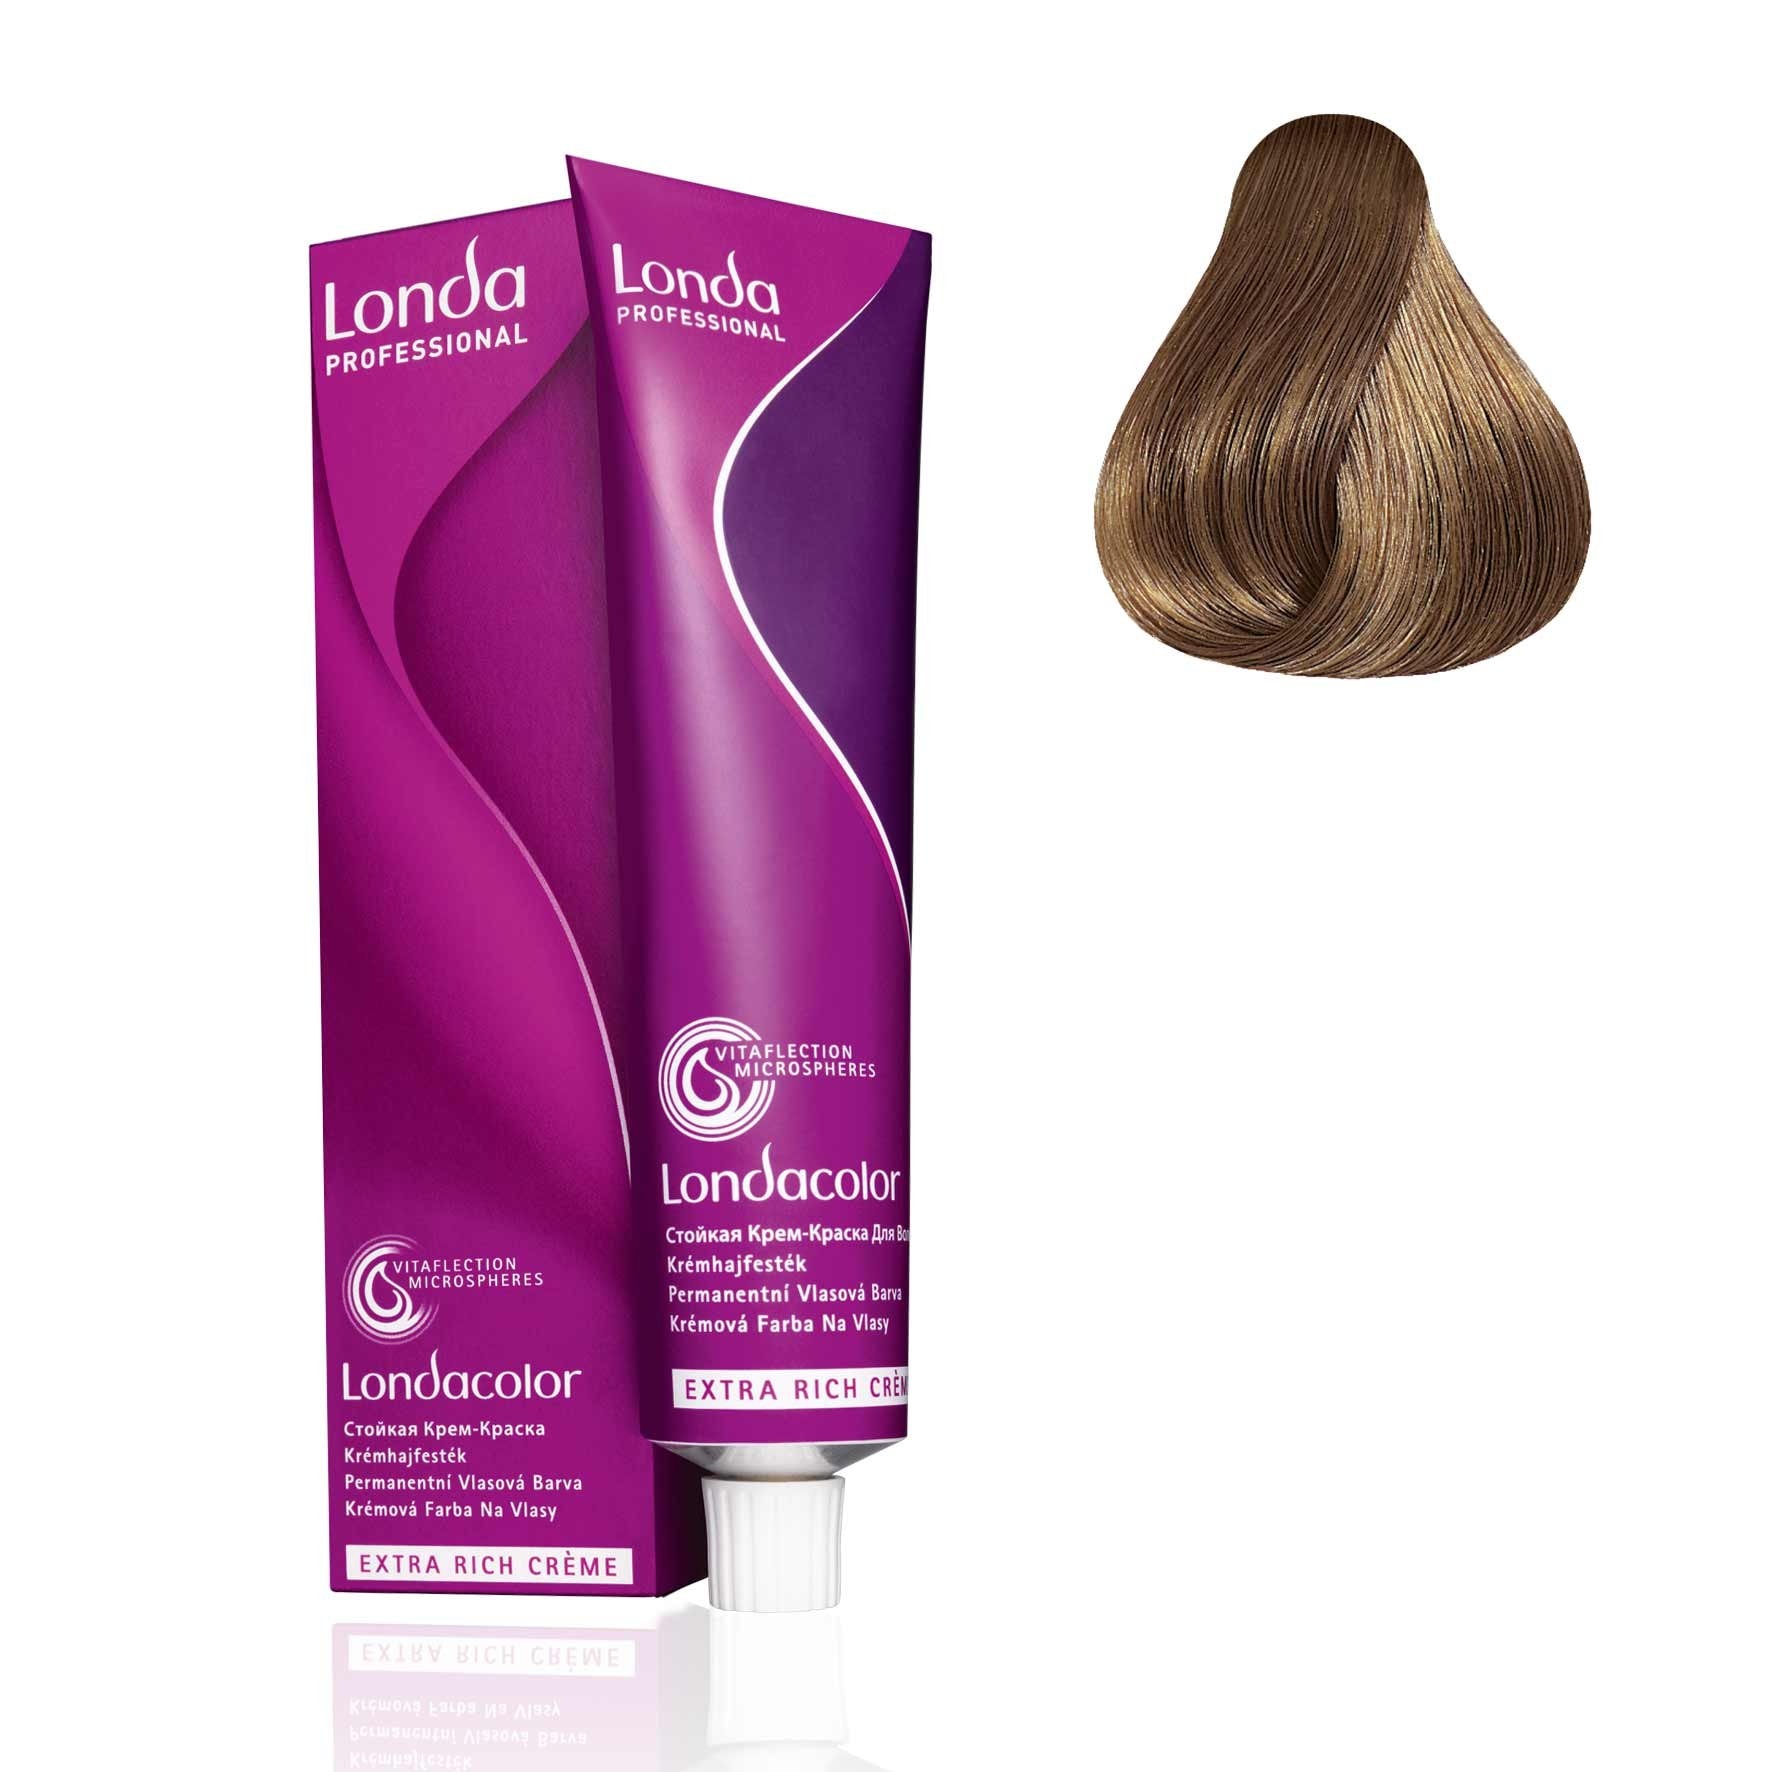 Londacolor Extra Rich Creme 6.81